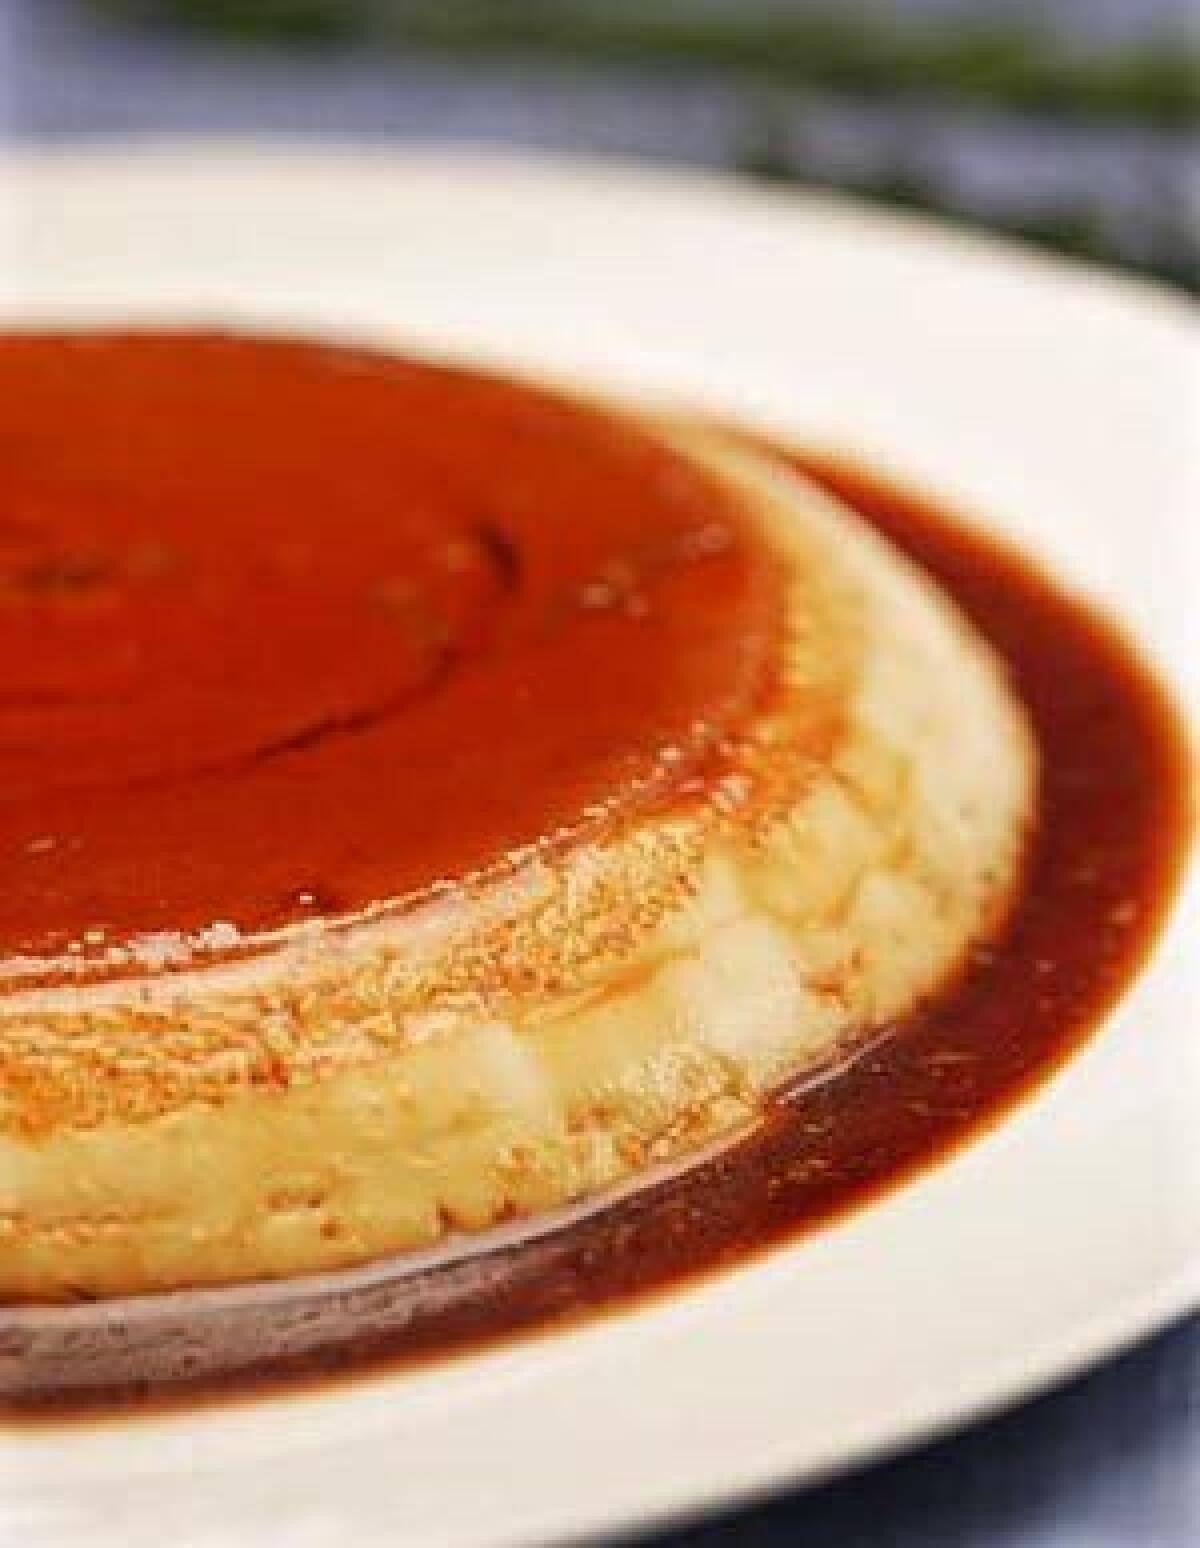 Flan is wonderful with both rosemary or thyme.